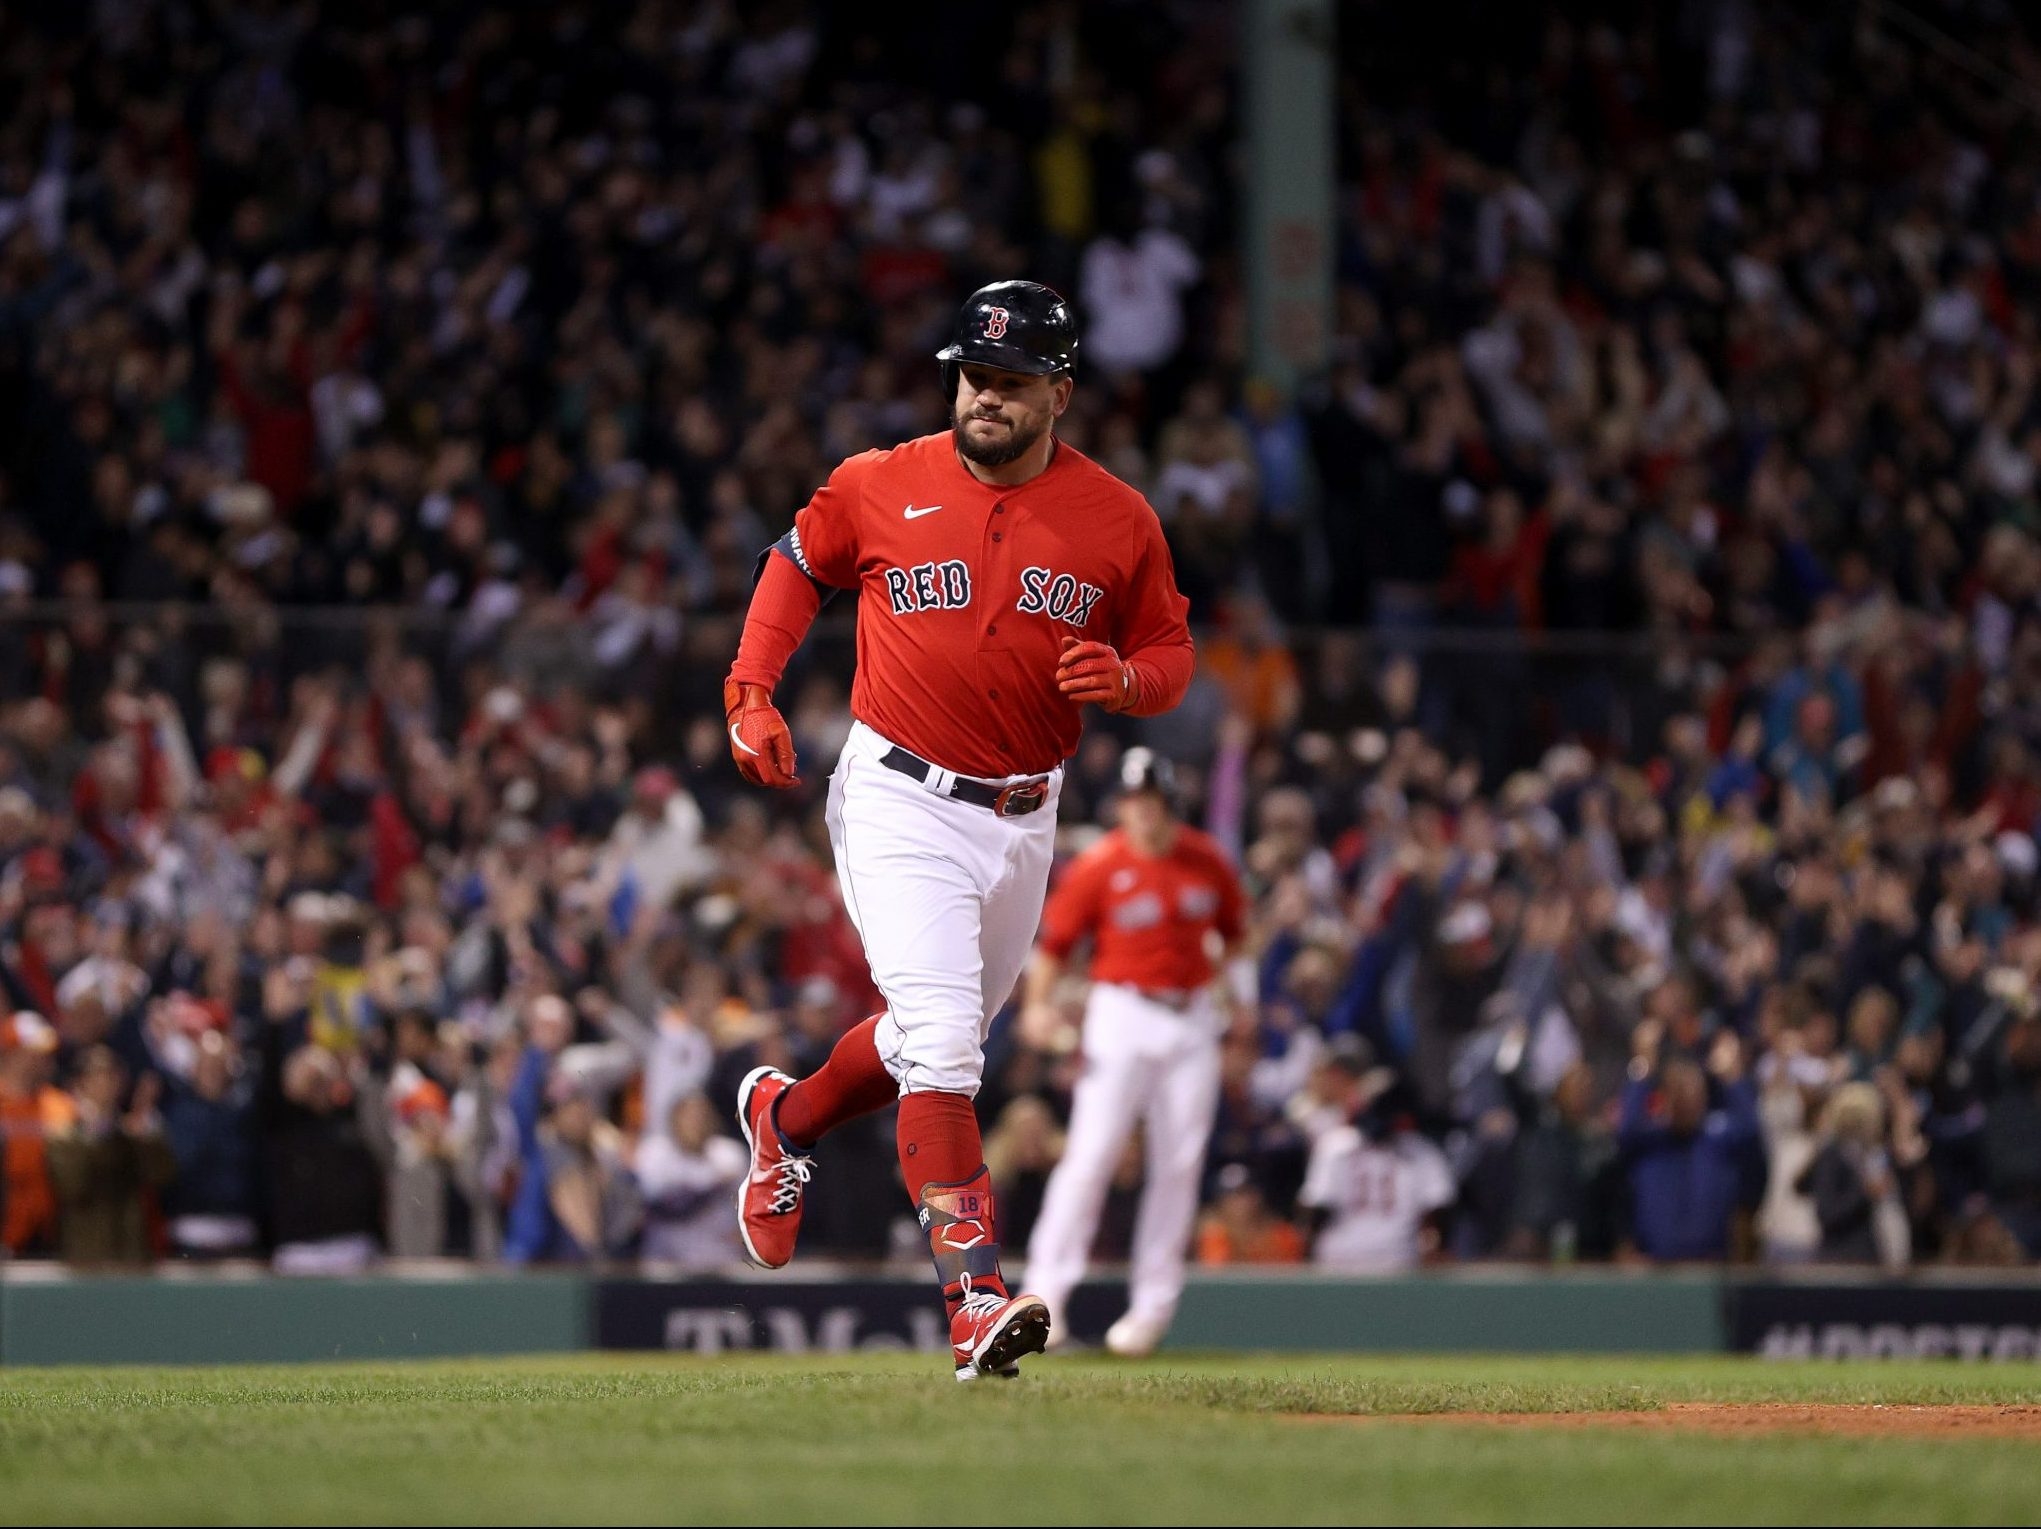 Schwarber, Red Sox slam Astros 12-3, lead ALCS 2-1